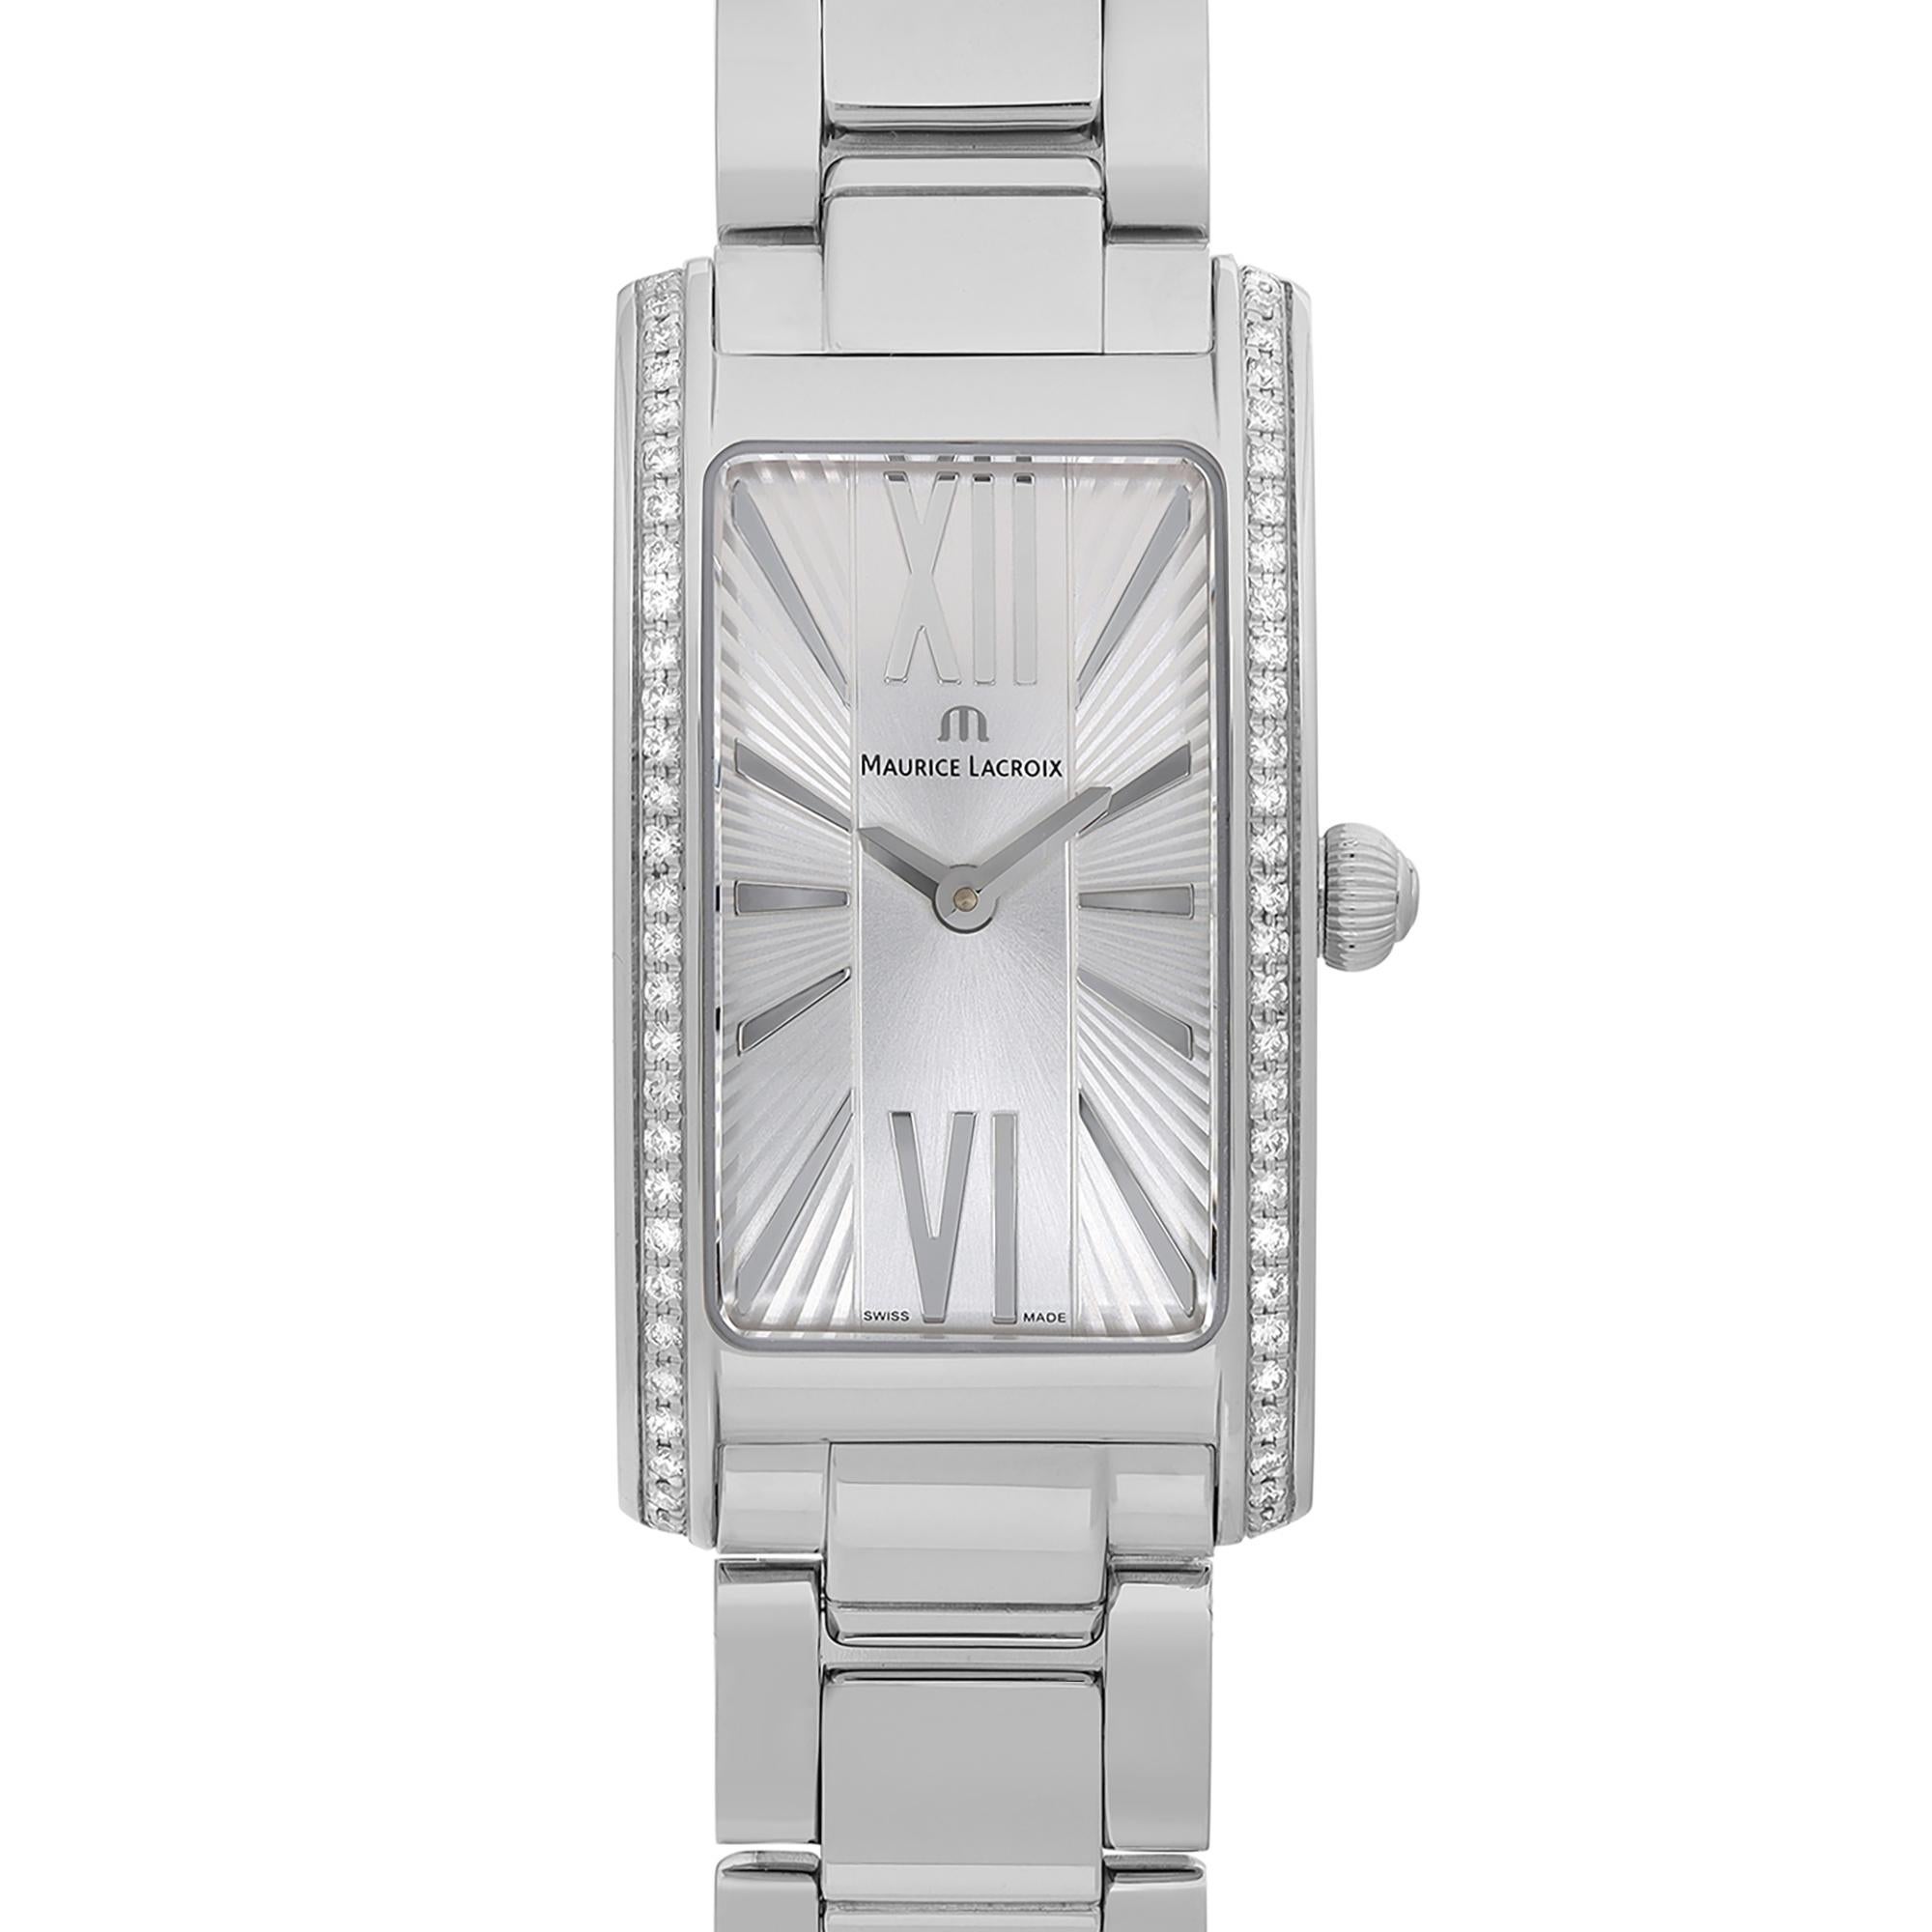 The watch has never been worn or used. The bezel is set with diamonds - approx. 0.39 carats. No original box and papers are included. Comes with a gift box and the seller's warranty card.  

Brand: Maurice Lacroix  Type: Wristwatch  Department: